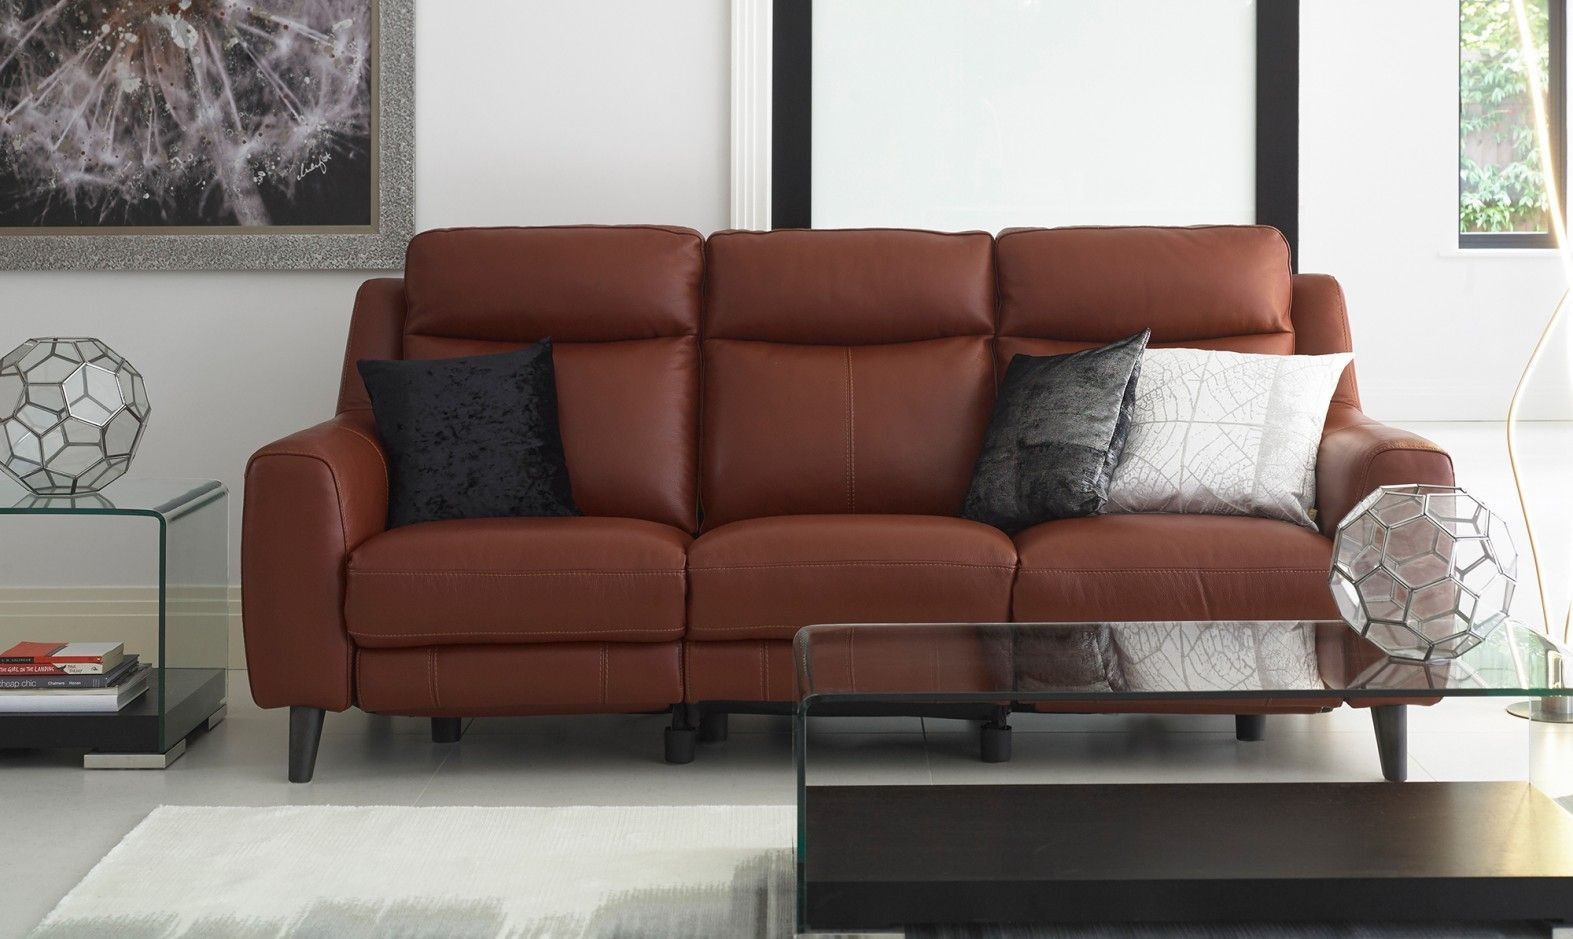 Recliner Sofas In Leather & Fabric | Fishpools With Regard To Recliner Sofas (Photo 7 of 10)